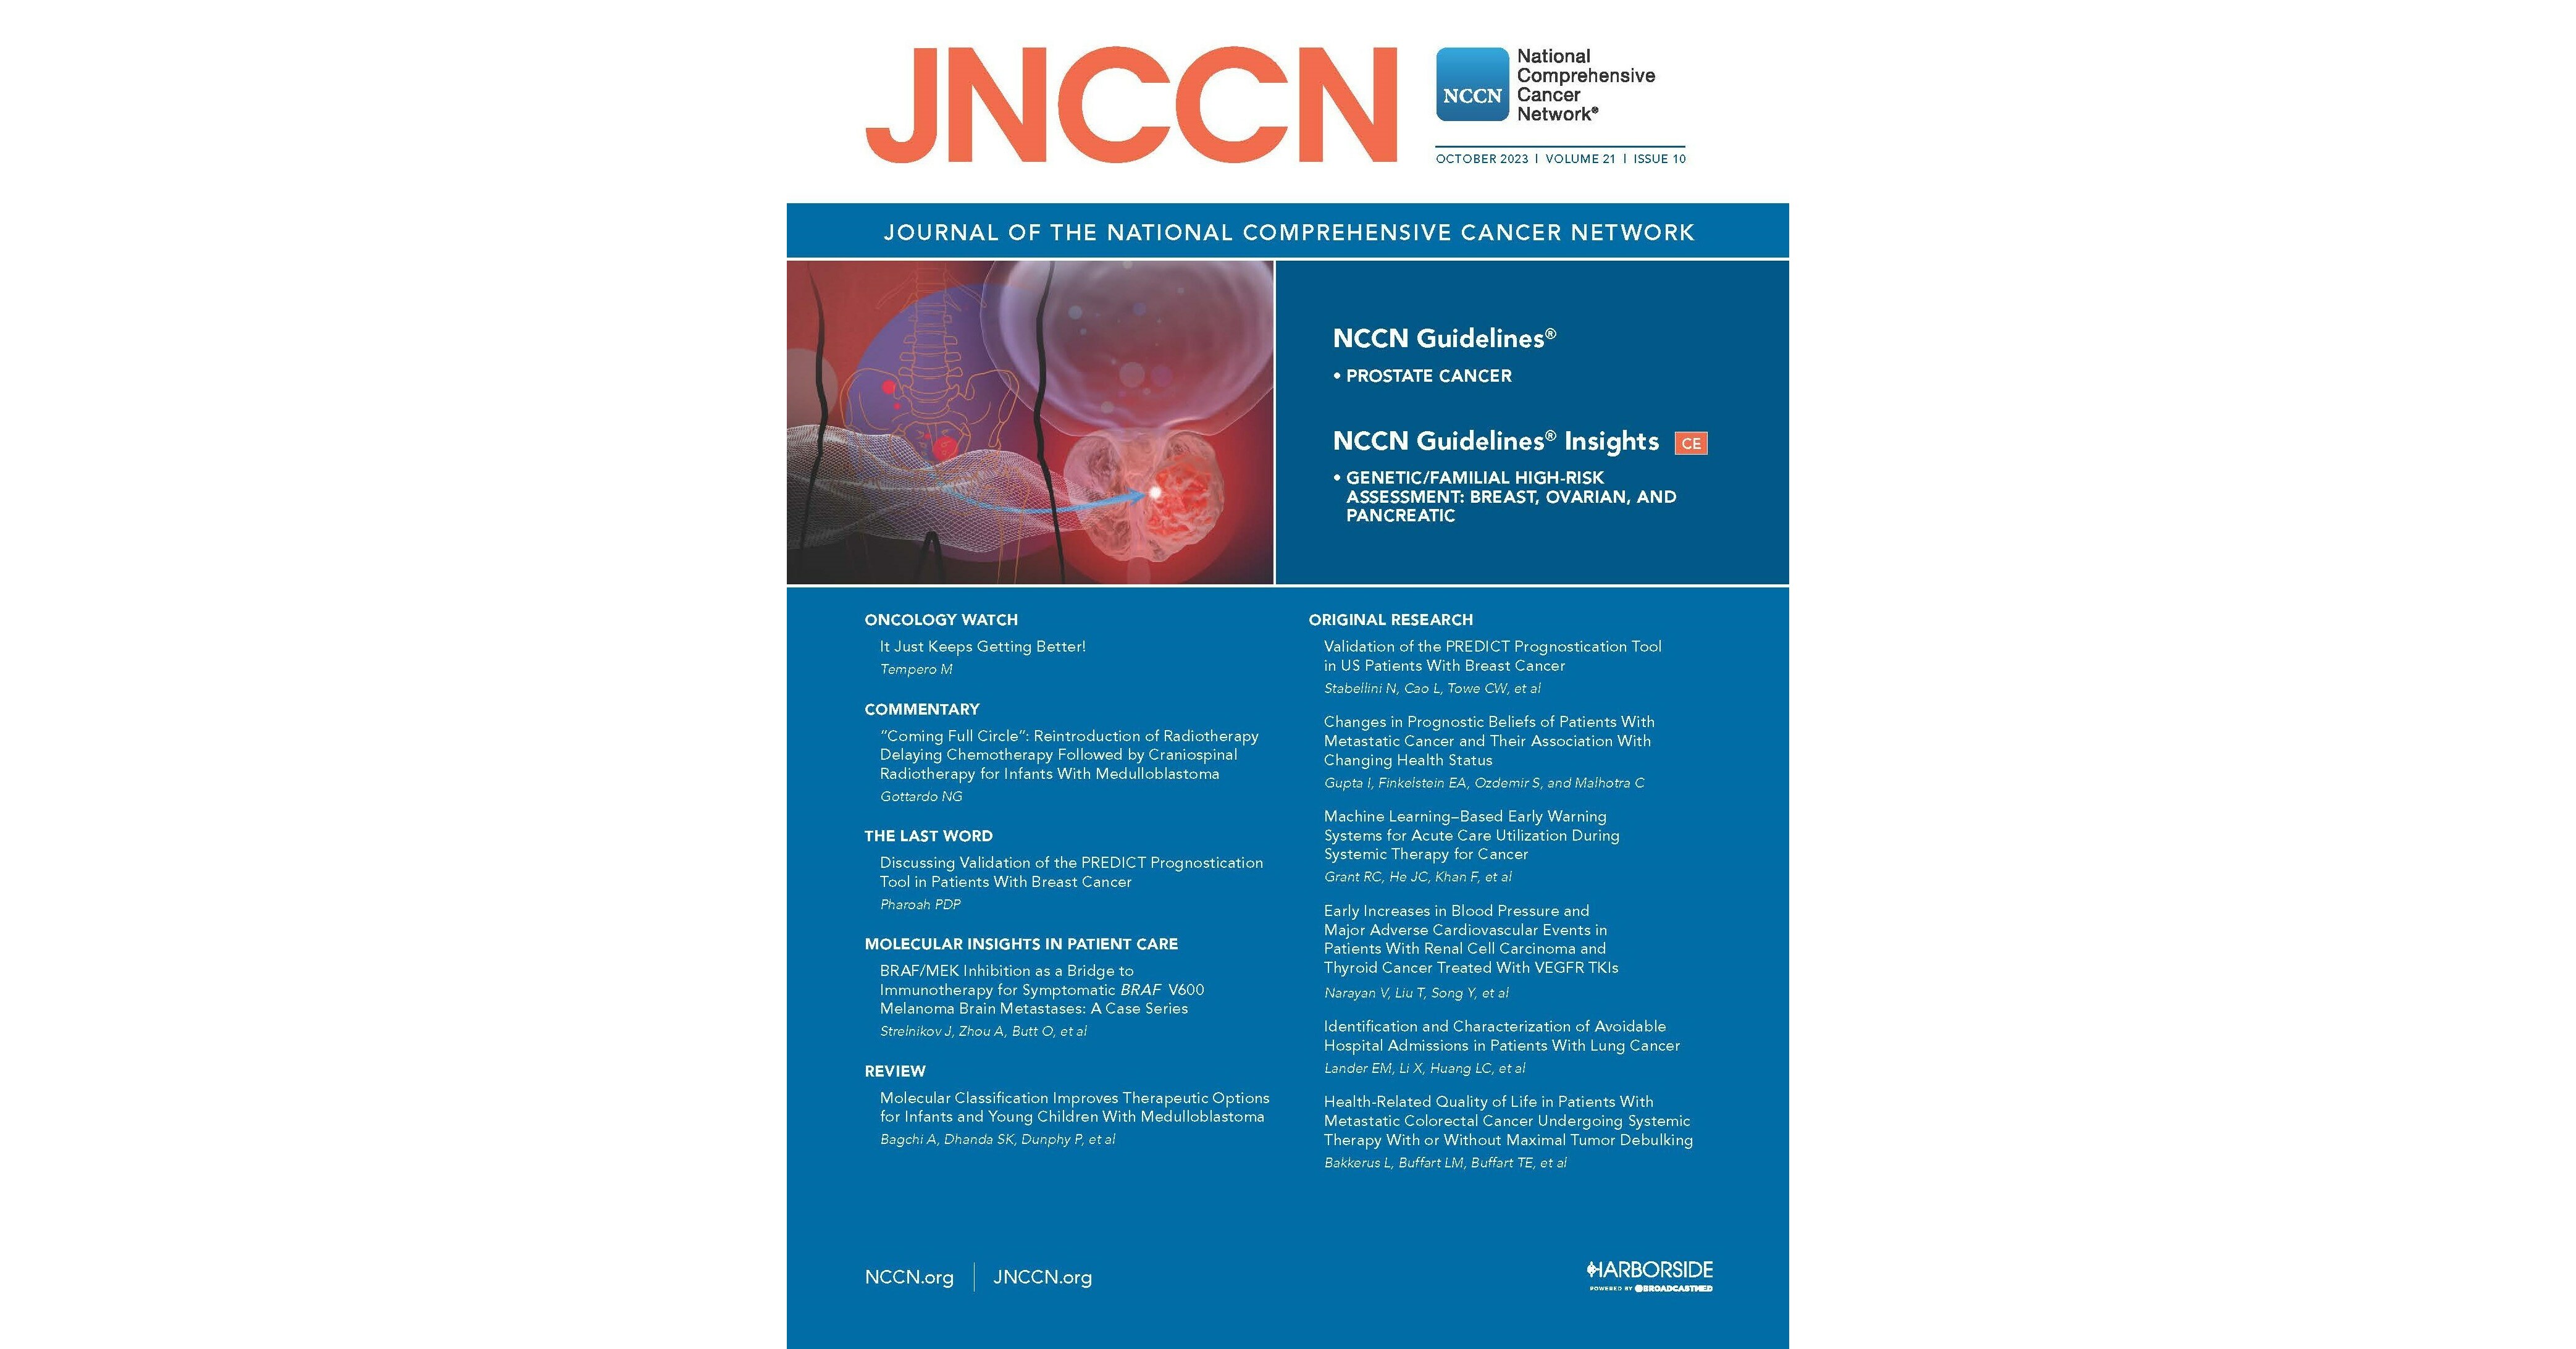 More Aggressive Treatment Doesn't Impact Quality of Life for Metastatic Colorectal Cancer Patients, According to New Study in JNCCN - PR Newswire